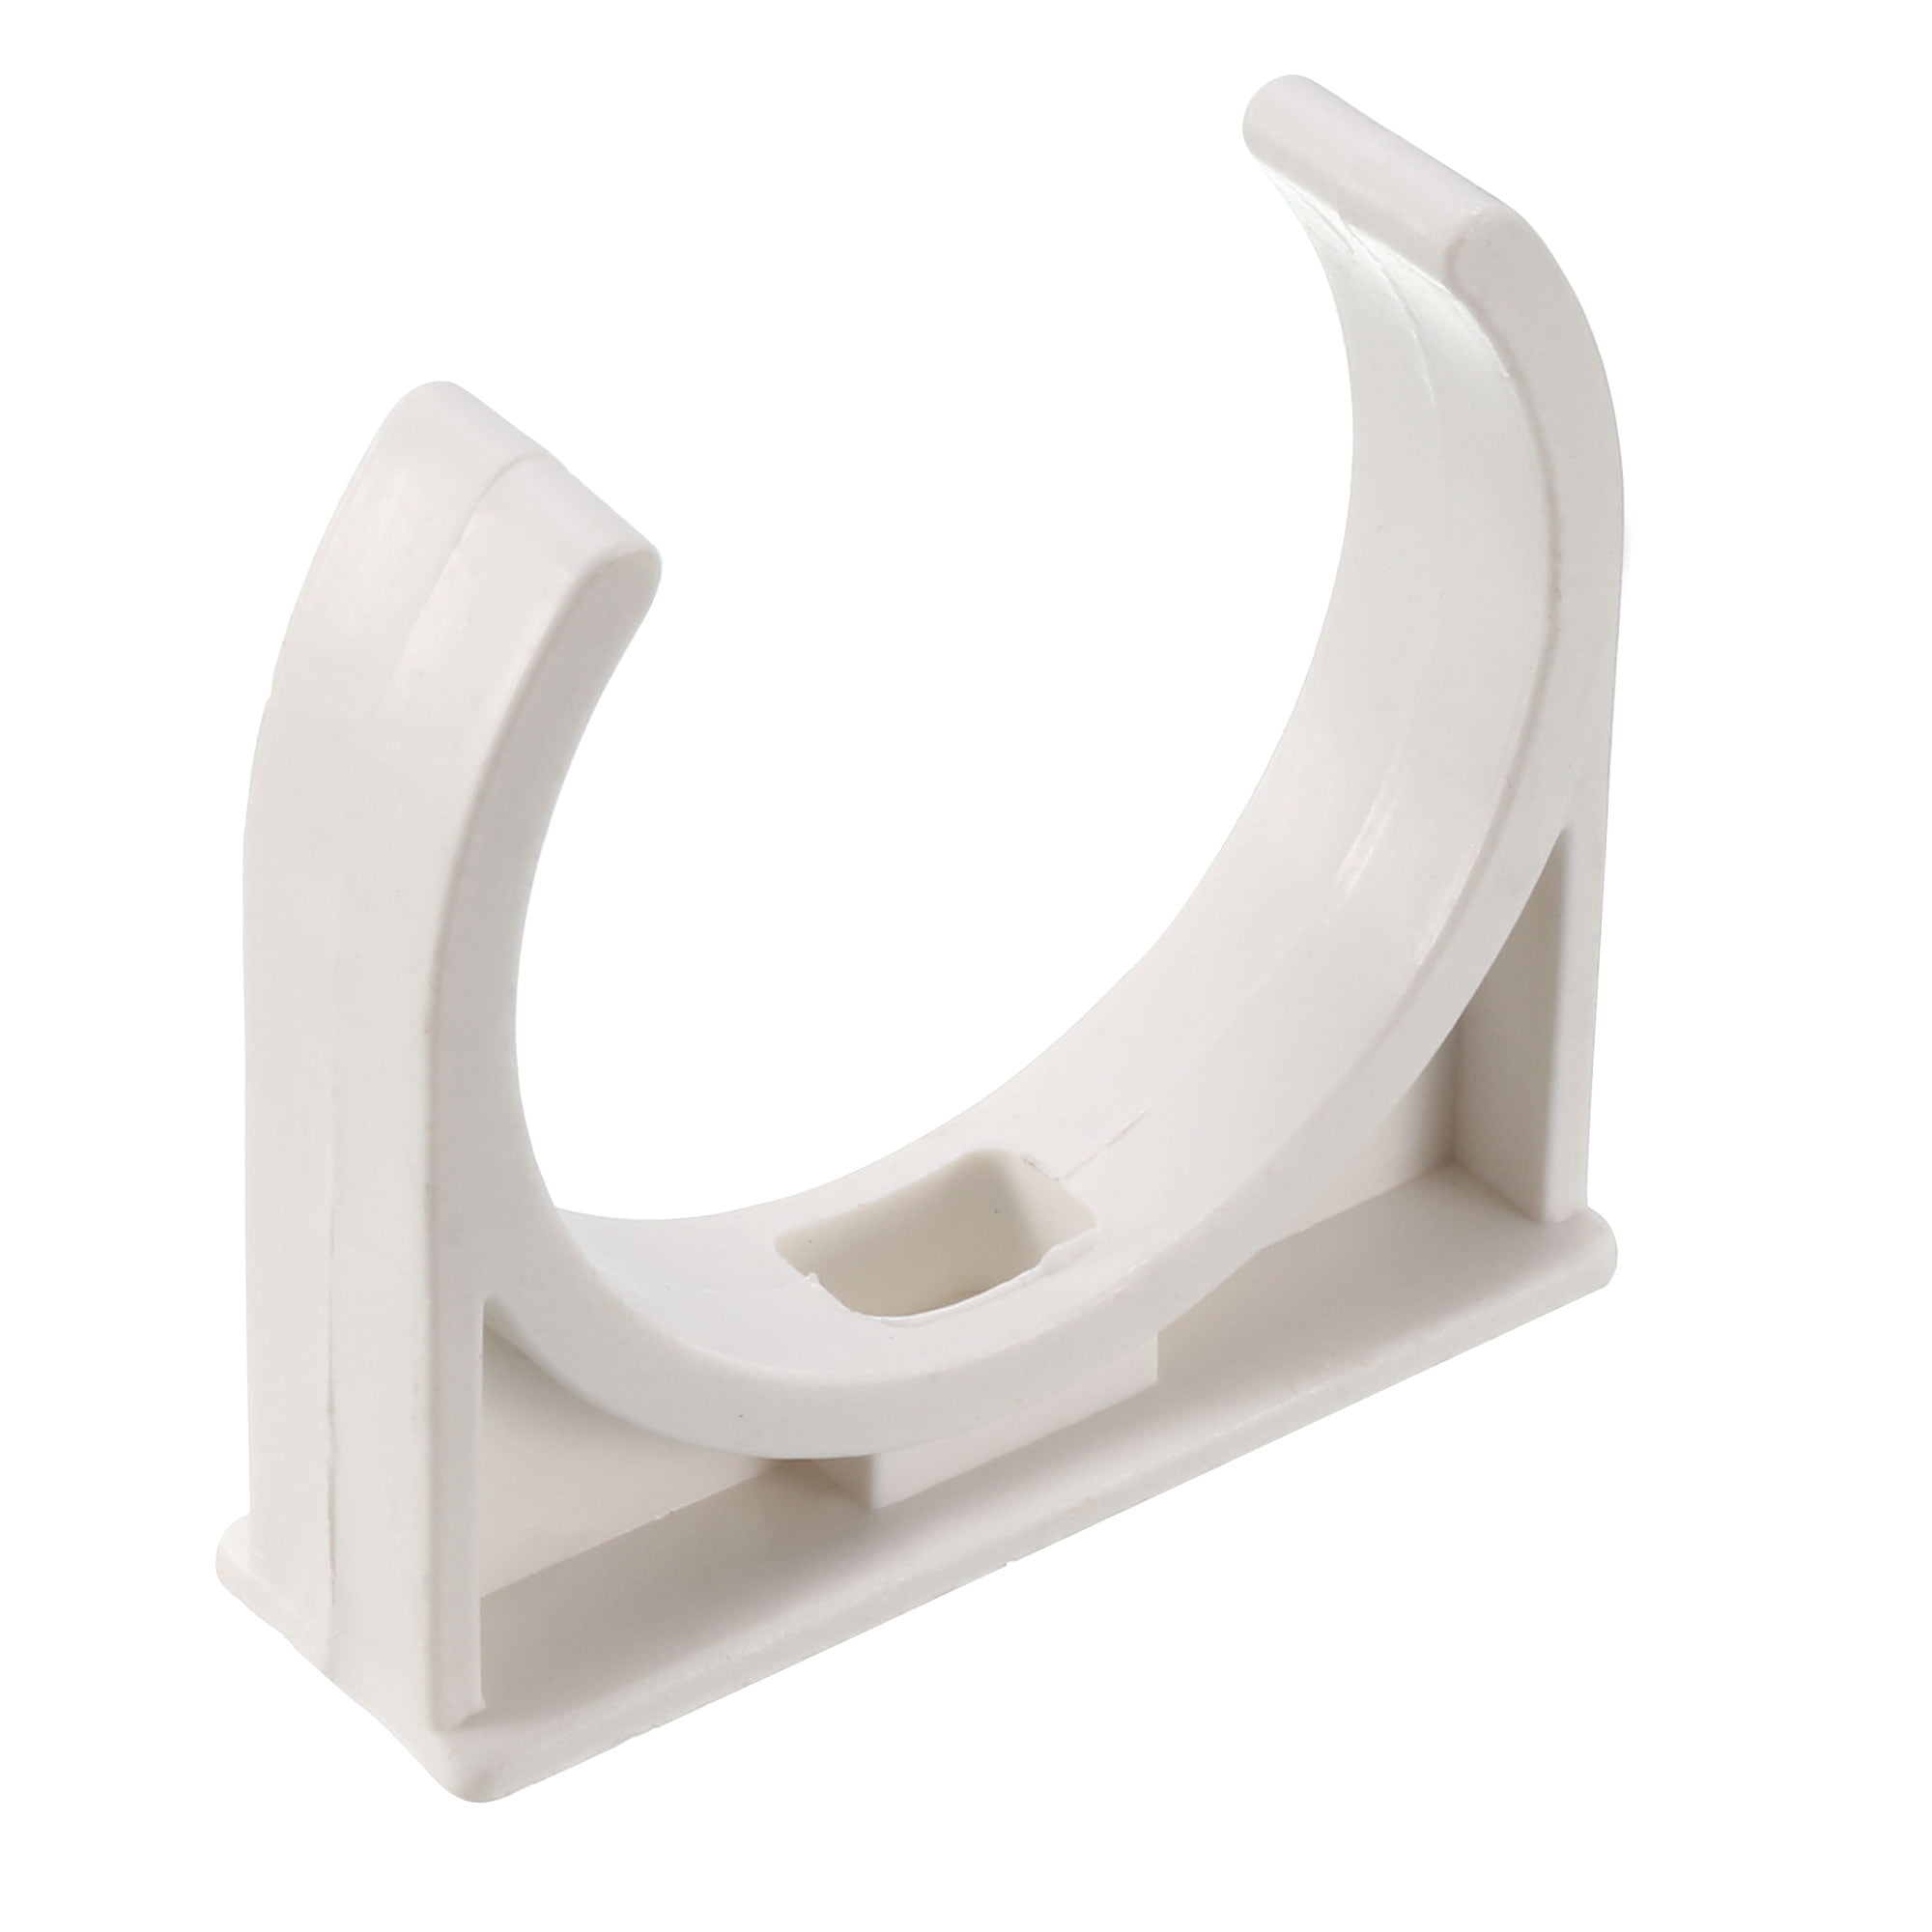 PVC Water Supply Pipe Clamp Clips, Fit for 1-1/2